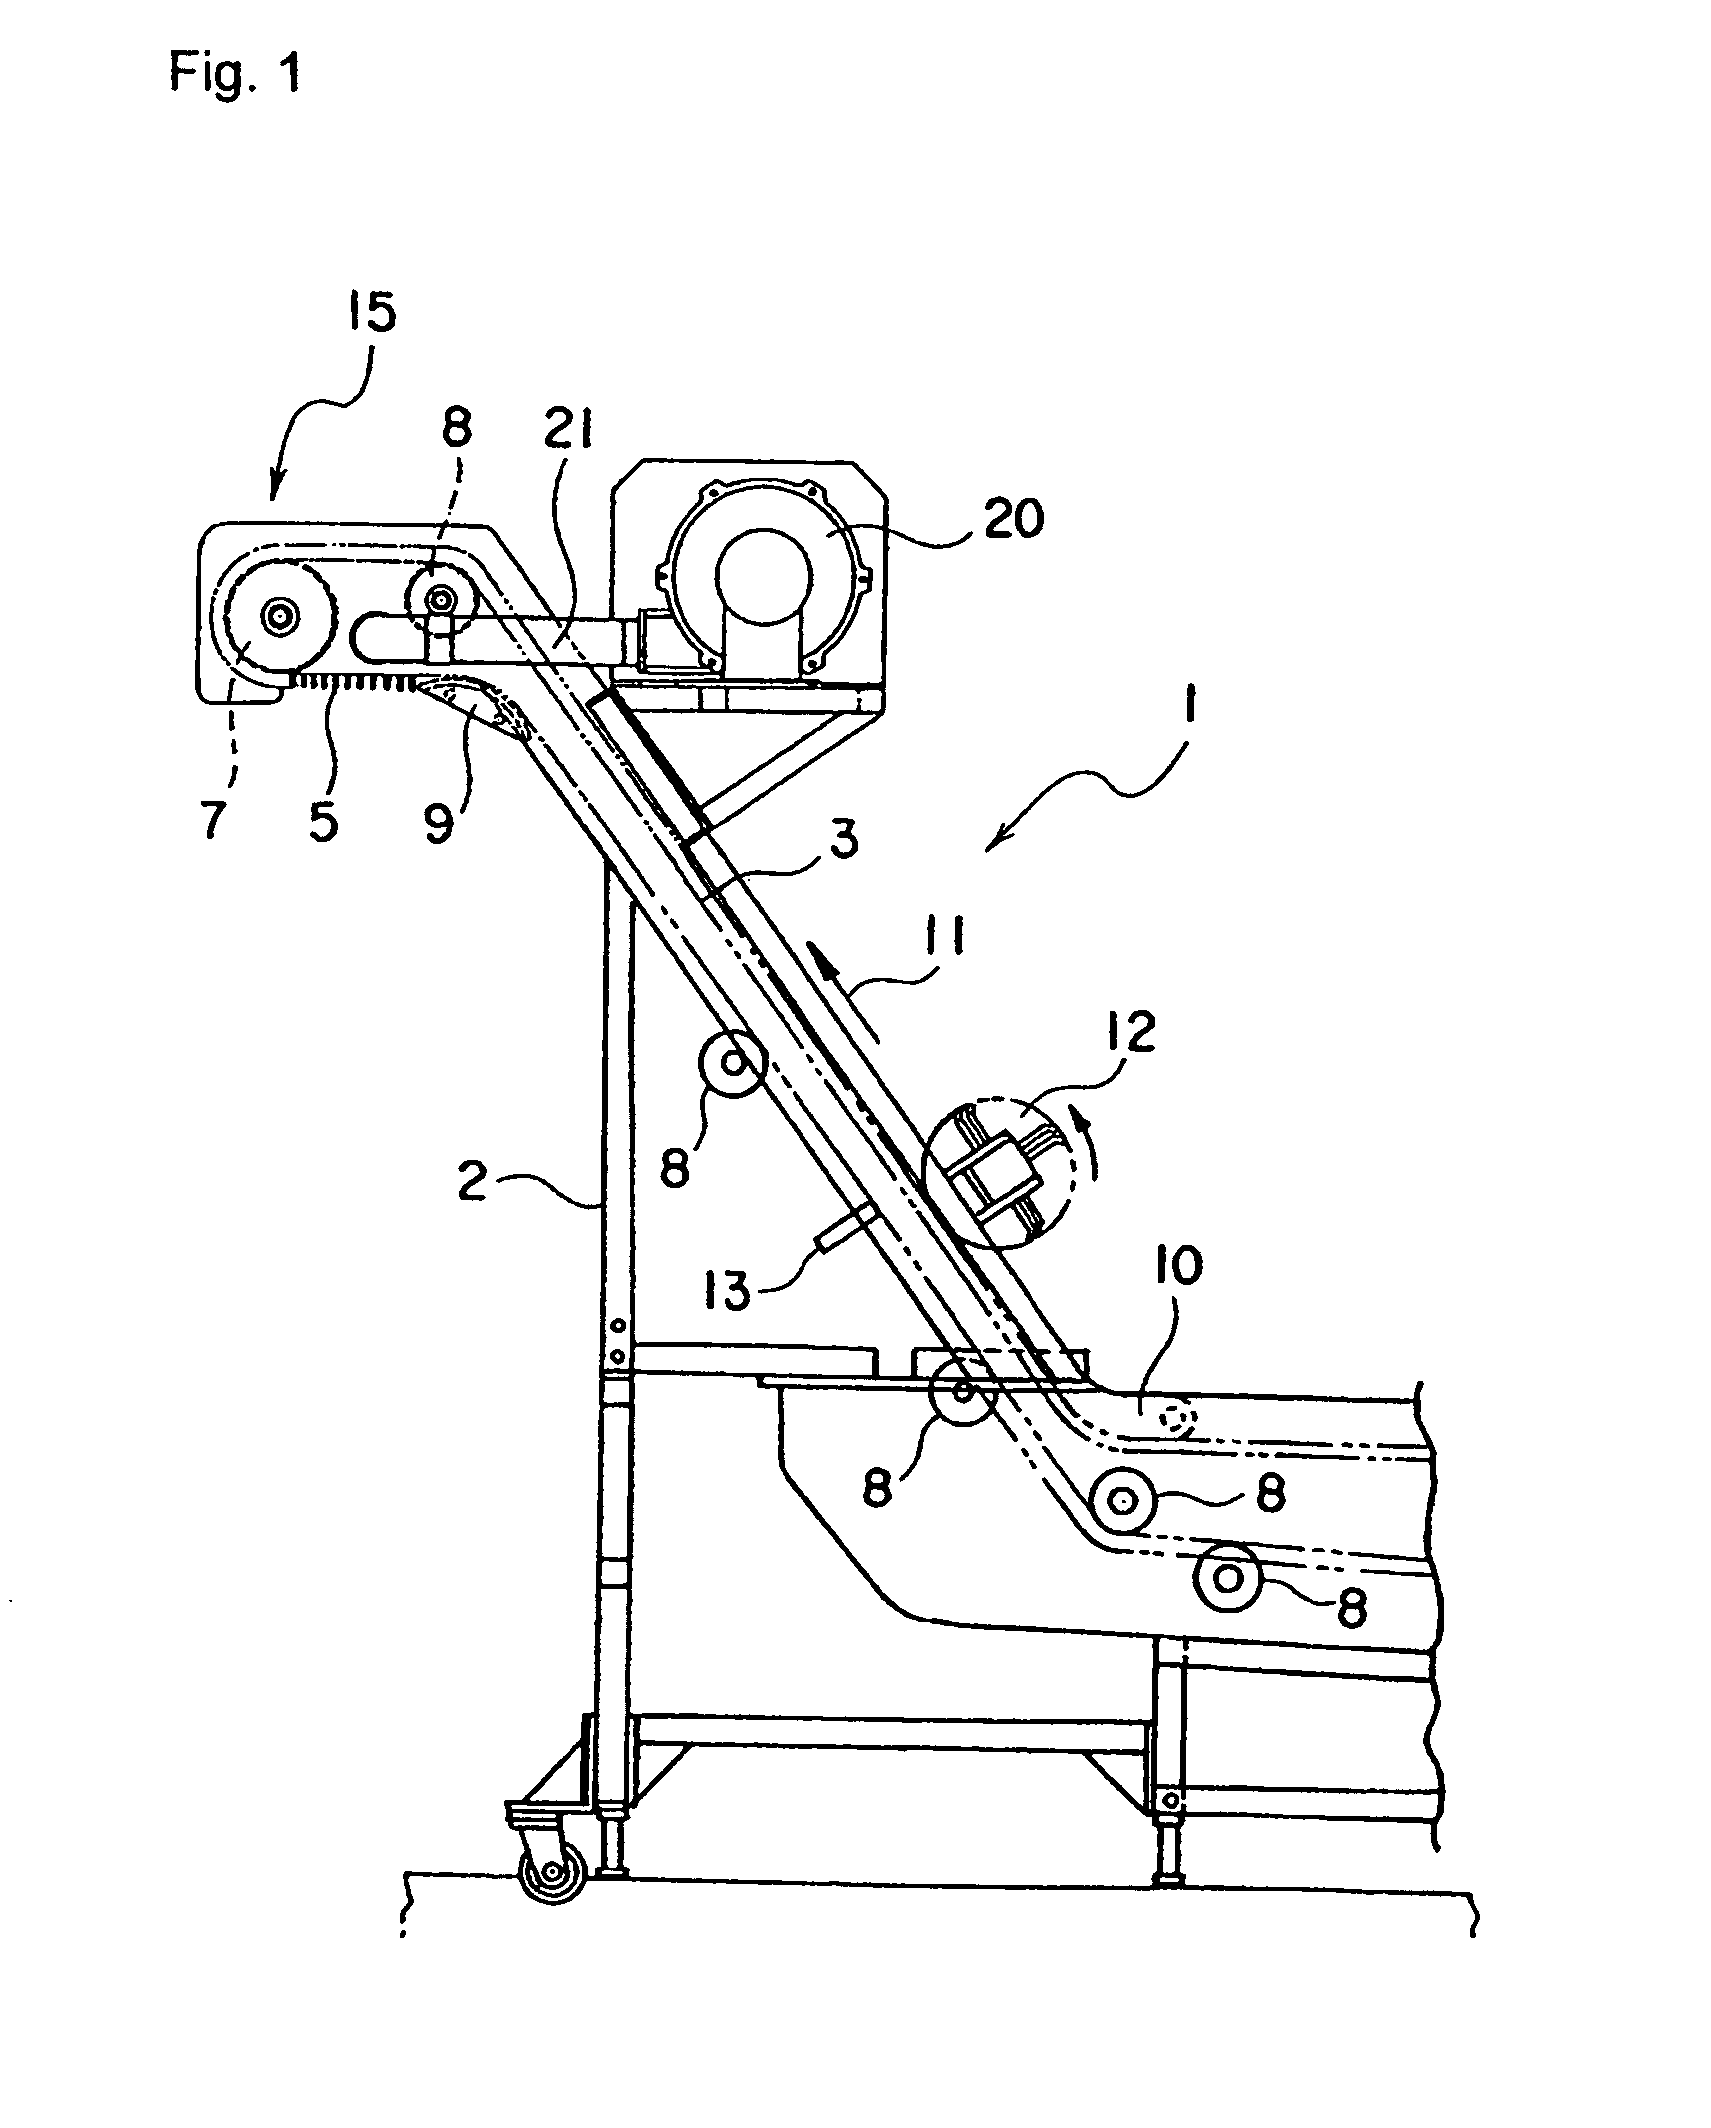 Bean sprouts-like articles transfer conveyor device